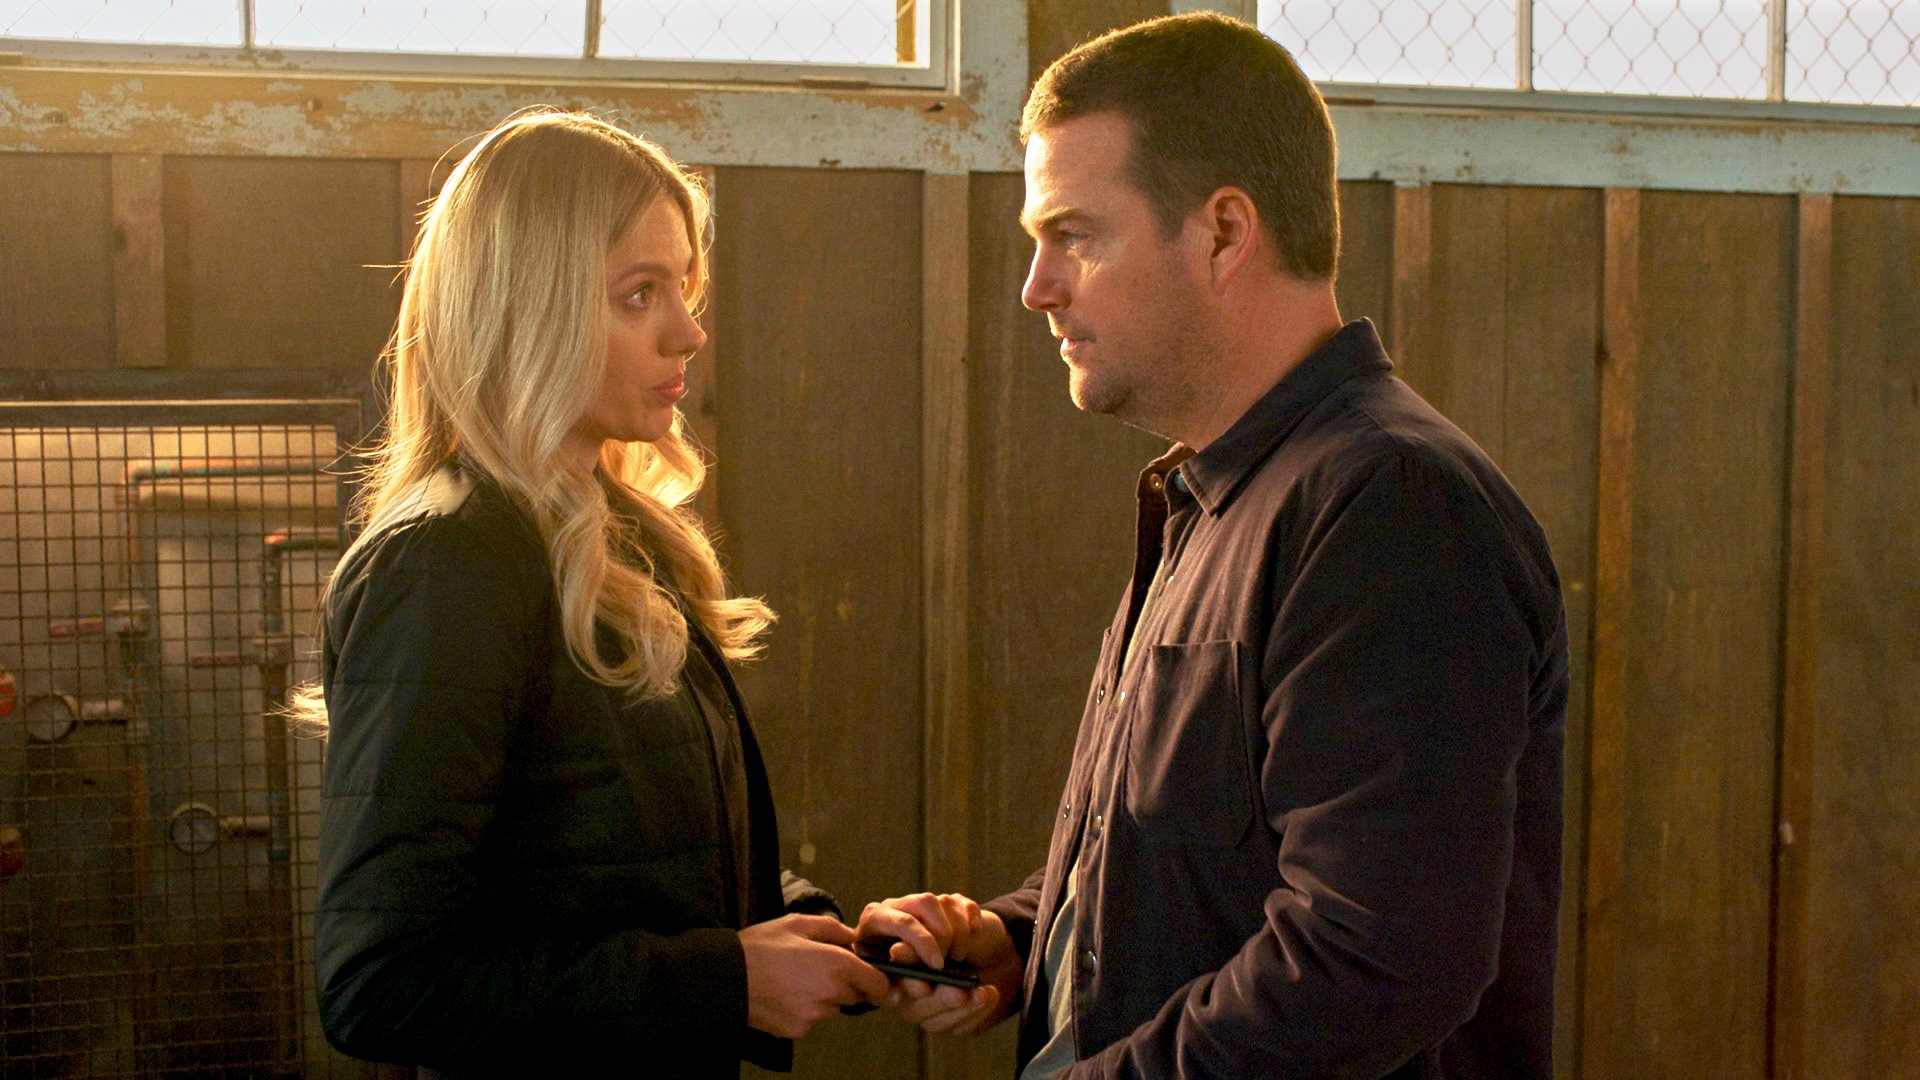 Bar Paly as Anna Kolcheck) and Chris O'Donnell as Special Agent G. Callen on 'NCIS: Los Angeles'